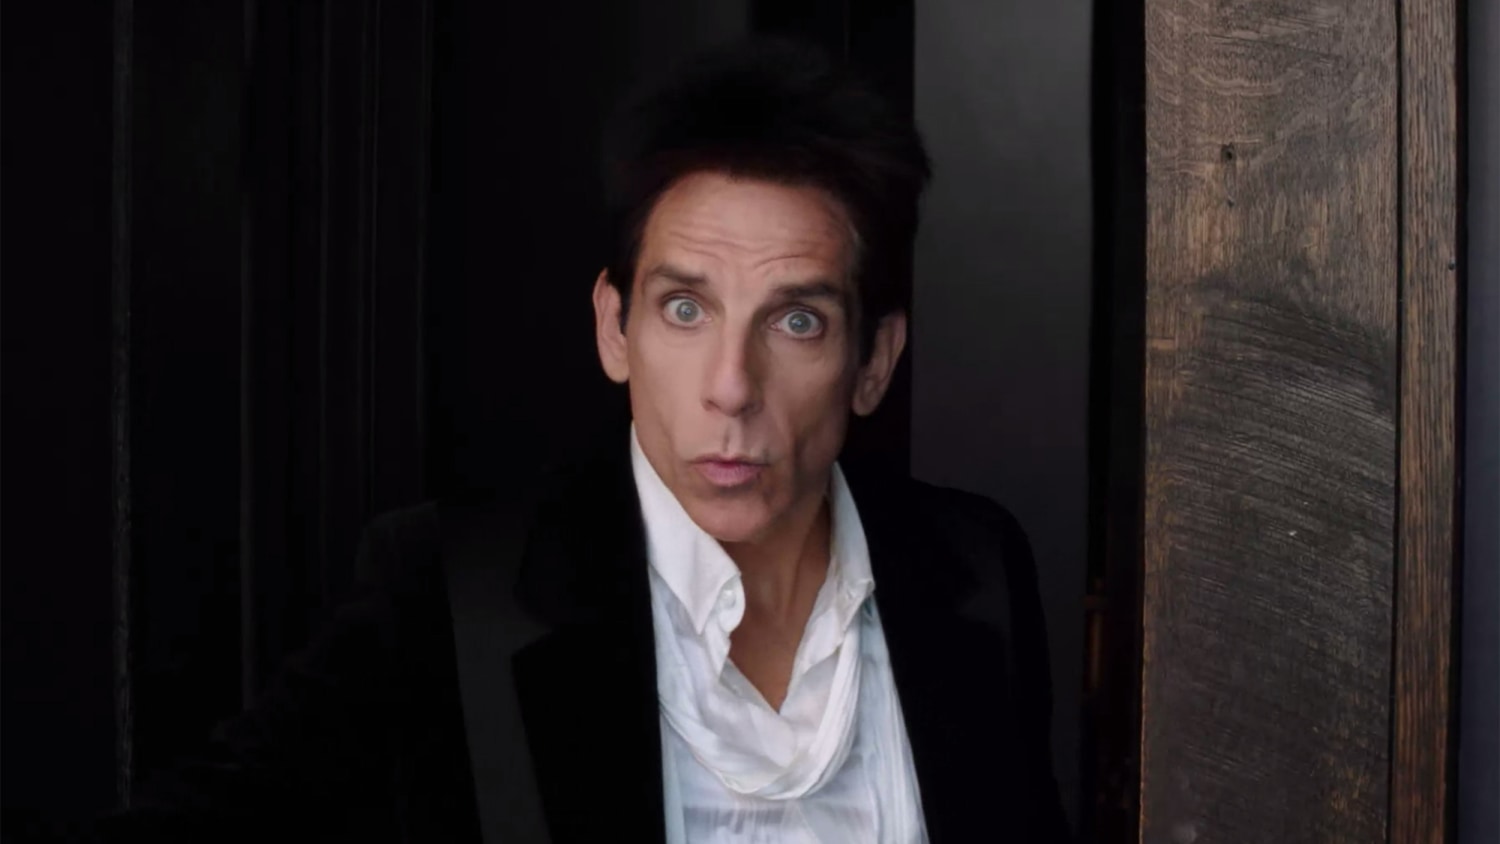 Derek Zoolander answers 73 questions for Vogue — as best he can